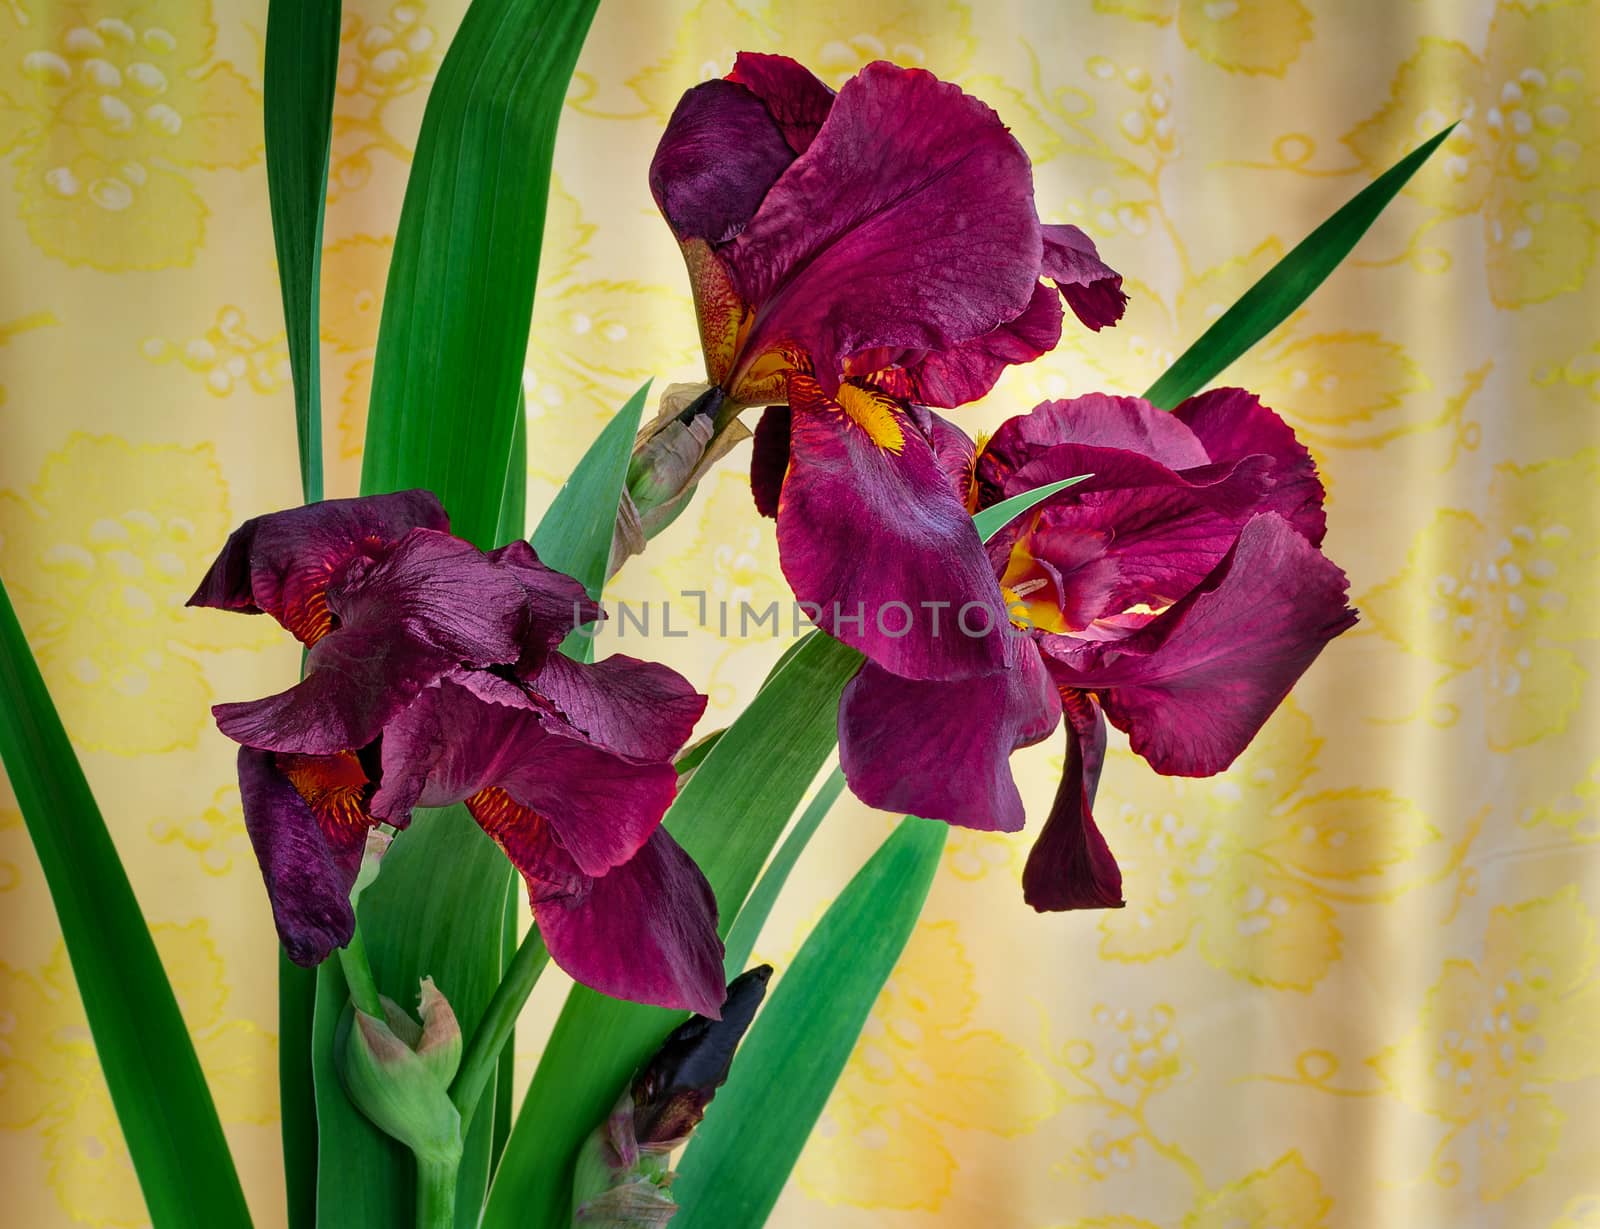 Bouquet from three beautiful irises of claret color against the yellow draped silk.